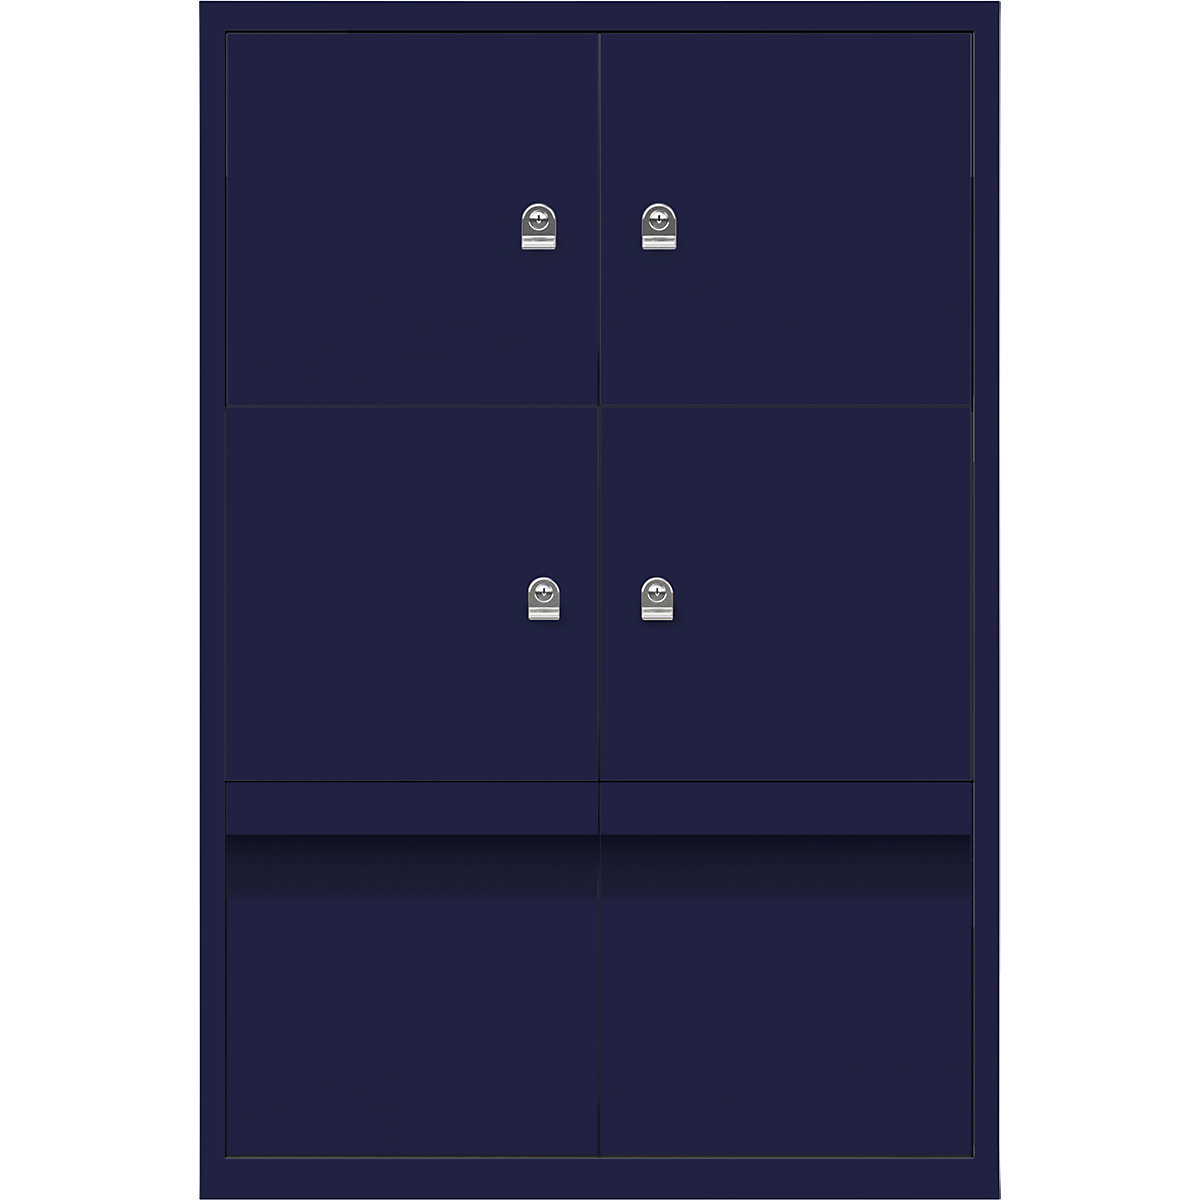 LateralFile™ lodge – BISLEY, with 4 lockable compartments and 2 drawers, height 375 mm each, oxford blue-2